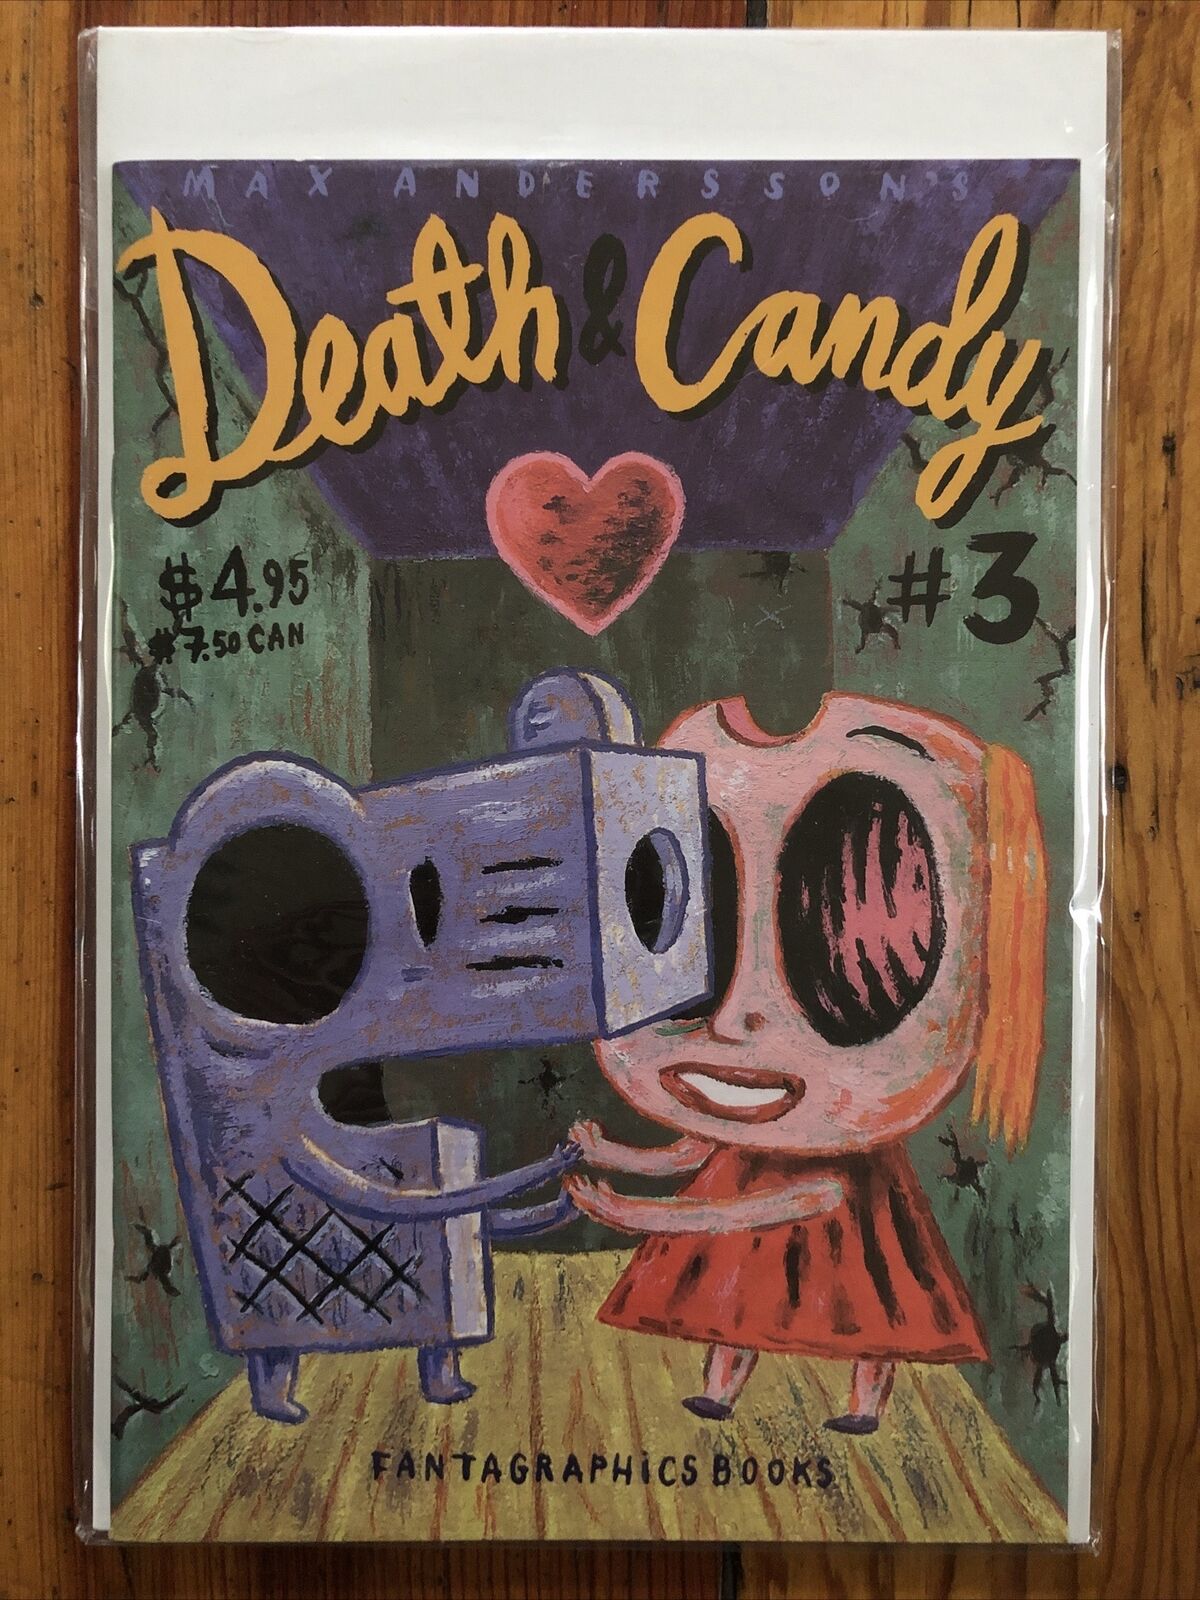 Death & Candy #3 (2002 Fantagraphics Books) by Max Andersson NEW Shop Stock NM